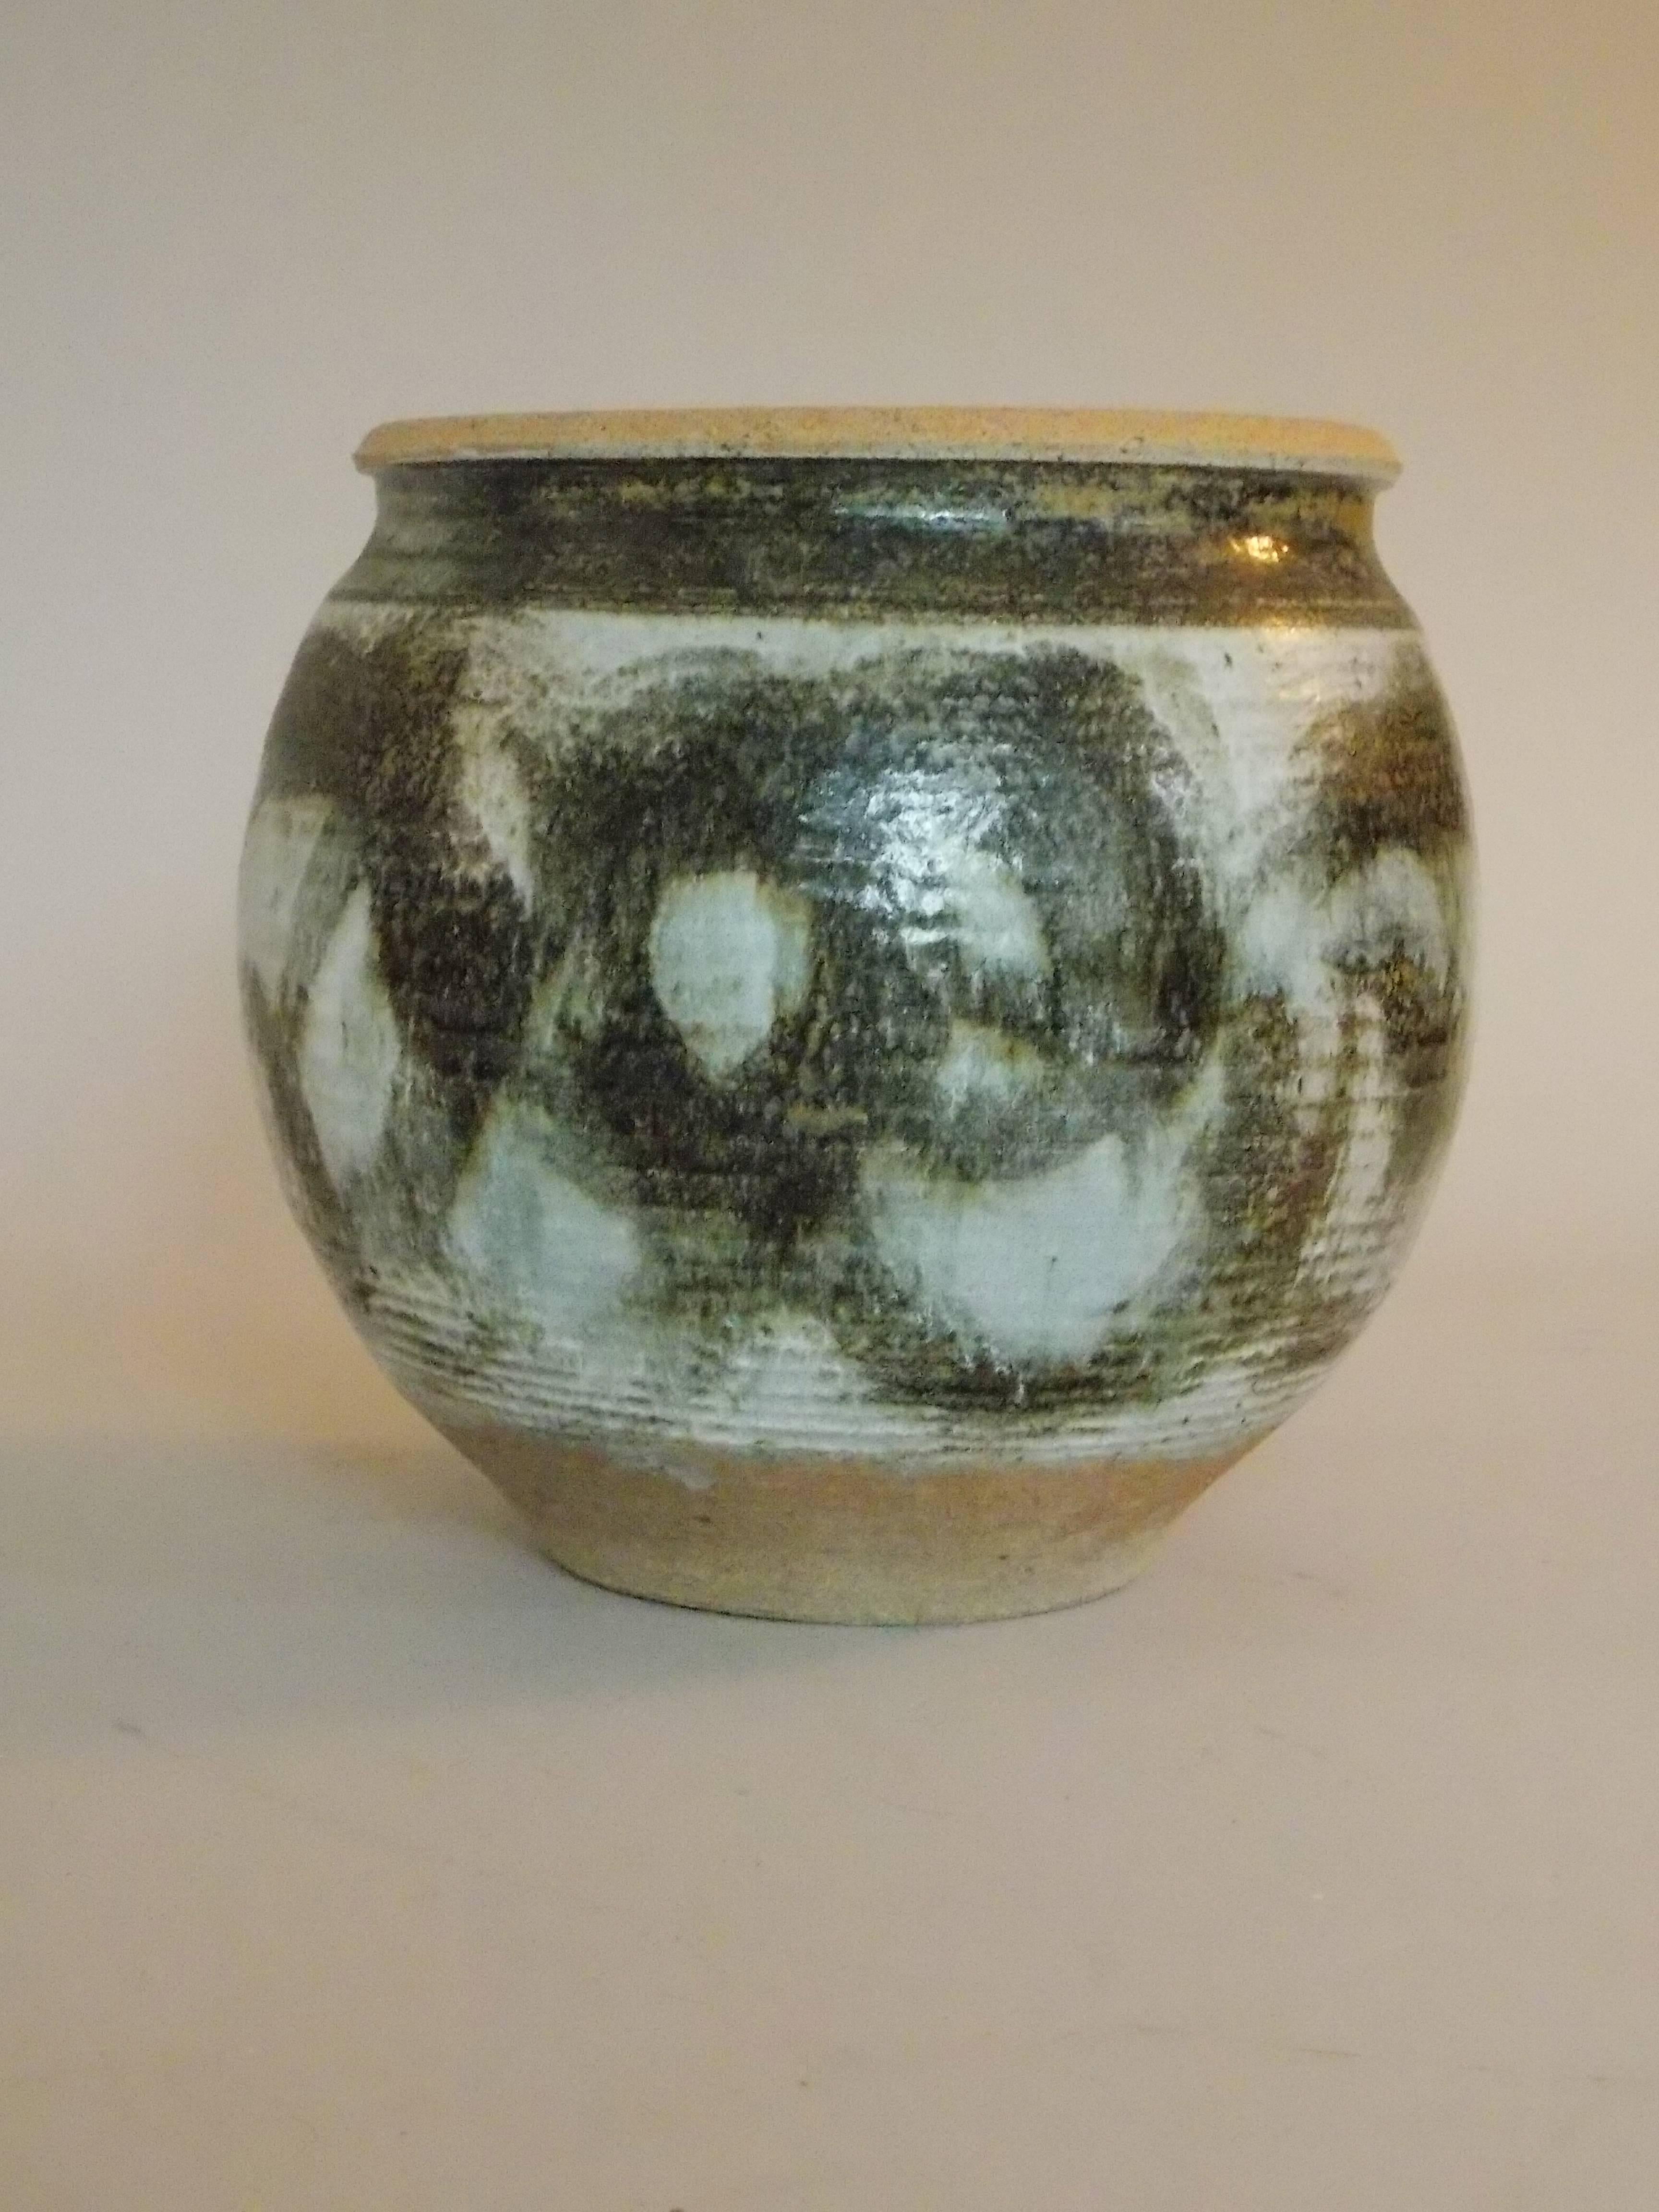 A great mid century modern art pottery design.
Wheel thrown clay with hand applied glaze design.
No chips, cracks or repairs.
No drain hole.
Great to use indoors.